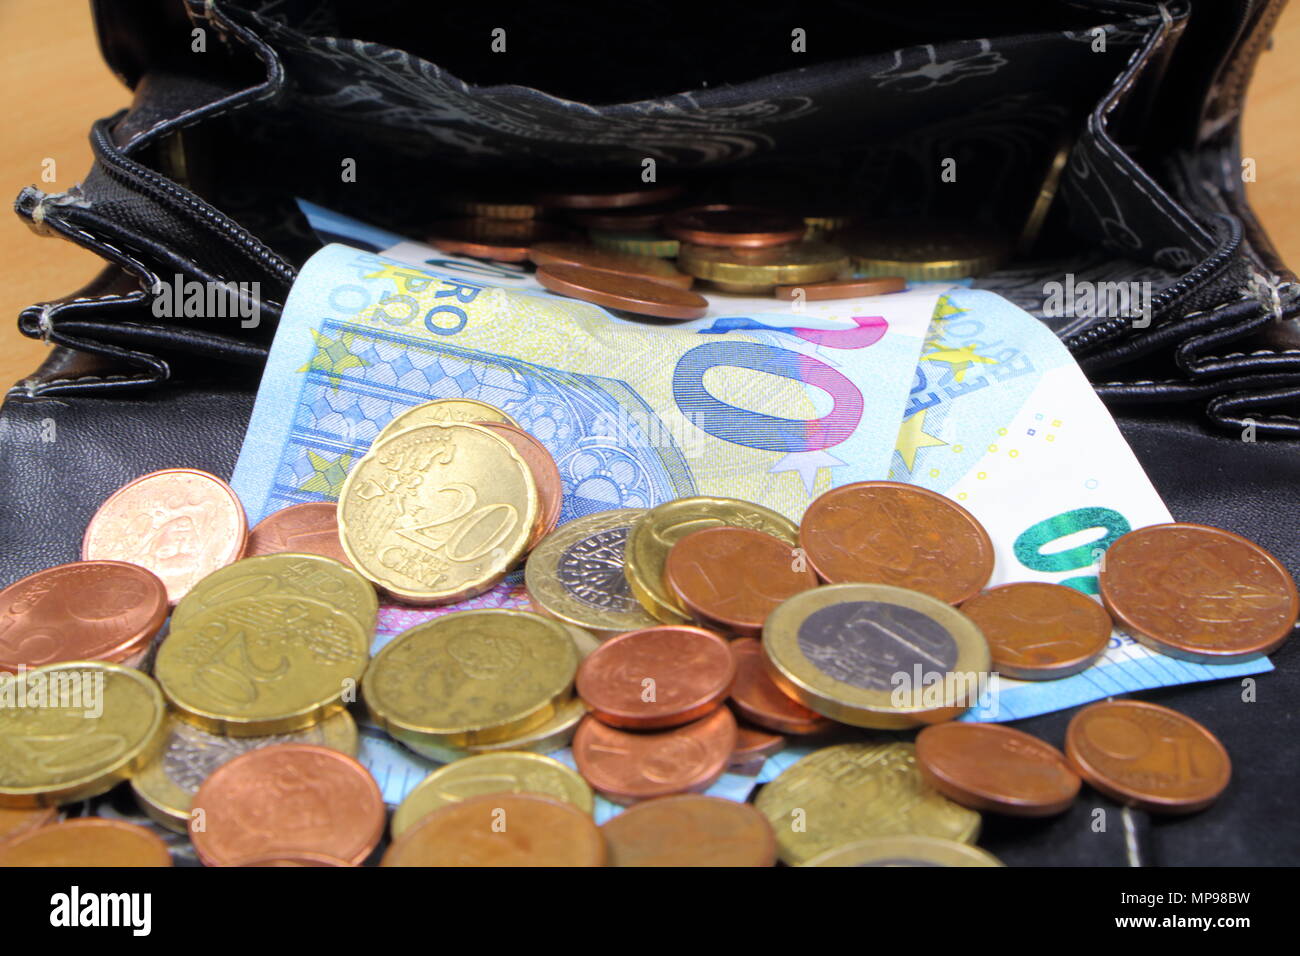 Euro coins and notes take out of a black purse Stock Photo